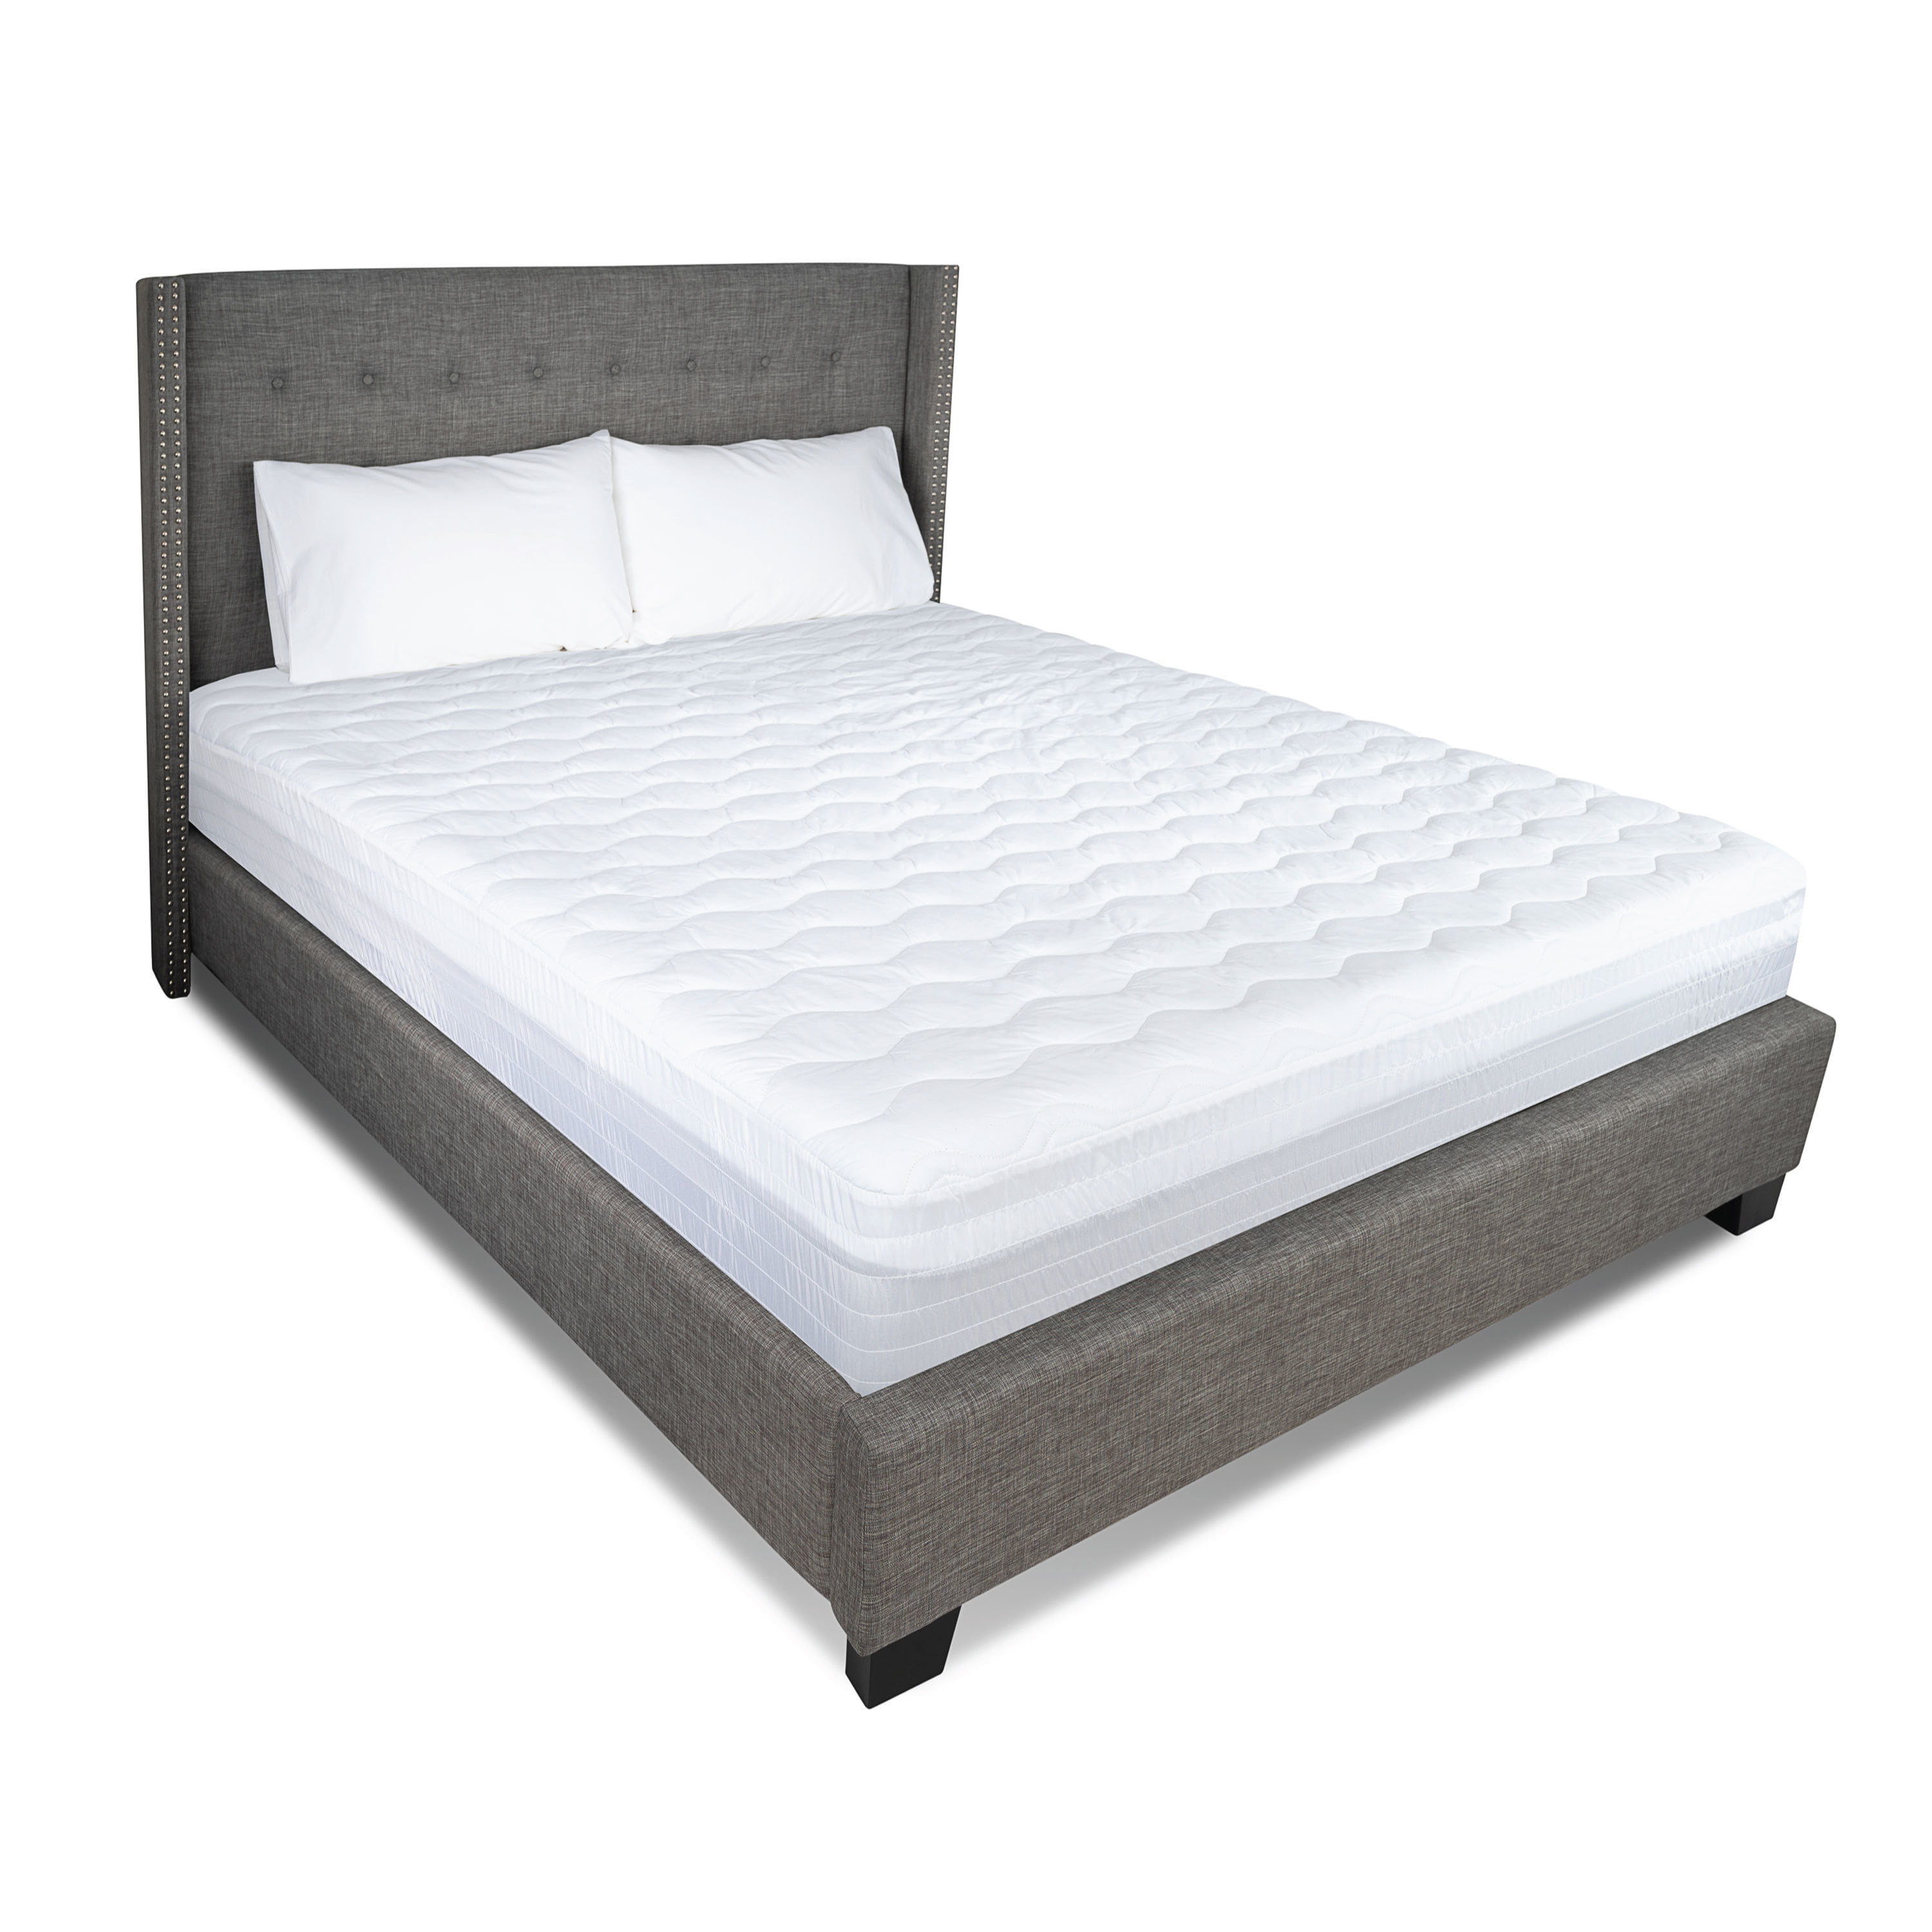 Beautyrest Quilted Memory Foam Mattress Pad in Multiple Sizes 